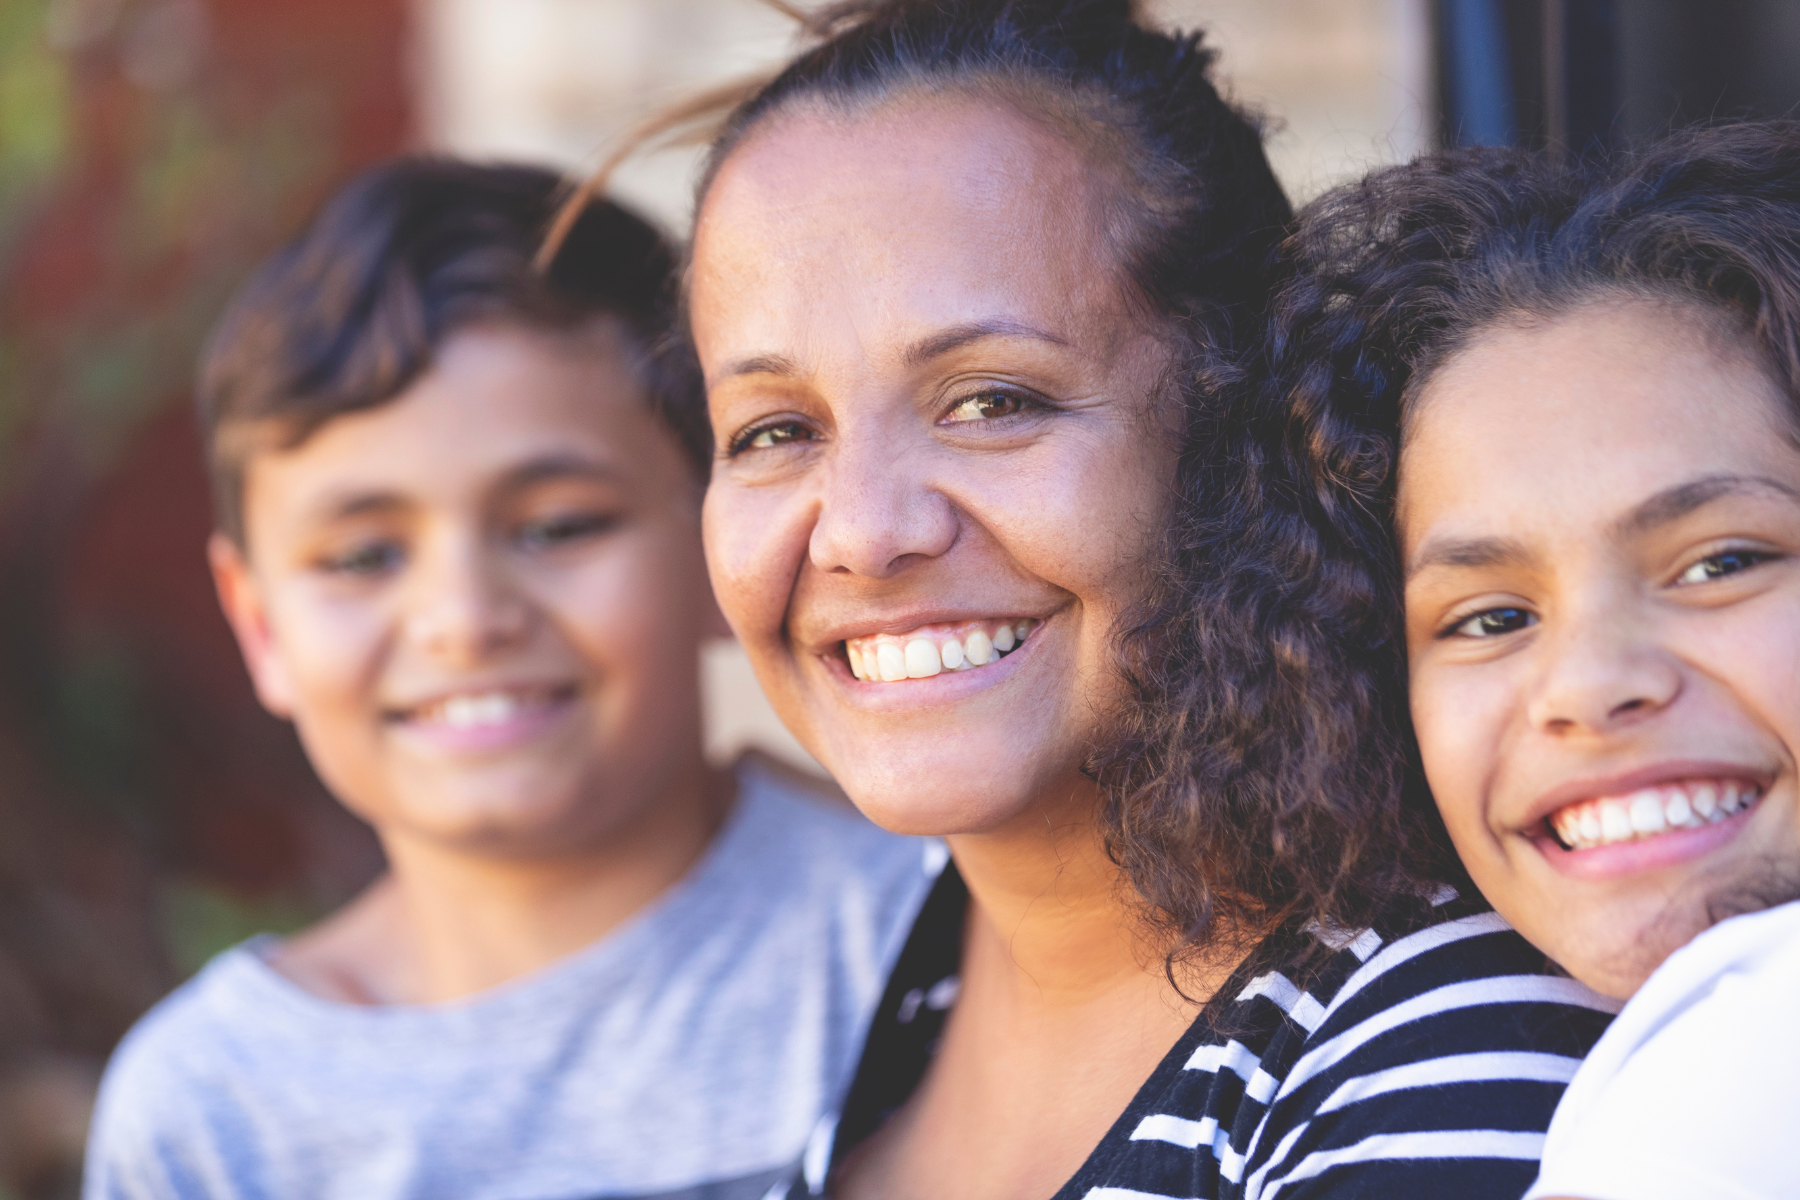 An Aboriginal woman with two children. All are smiling.